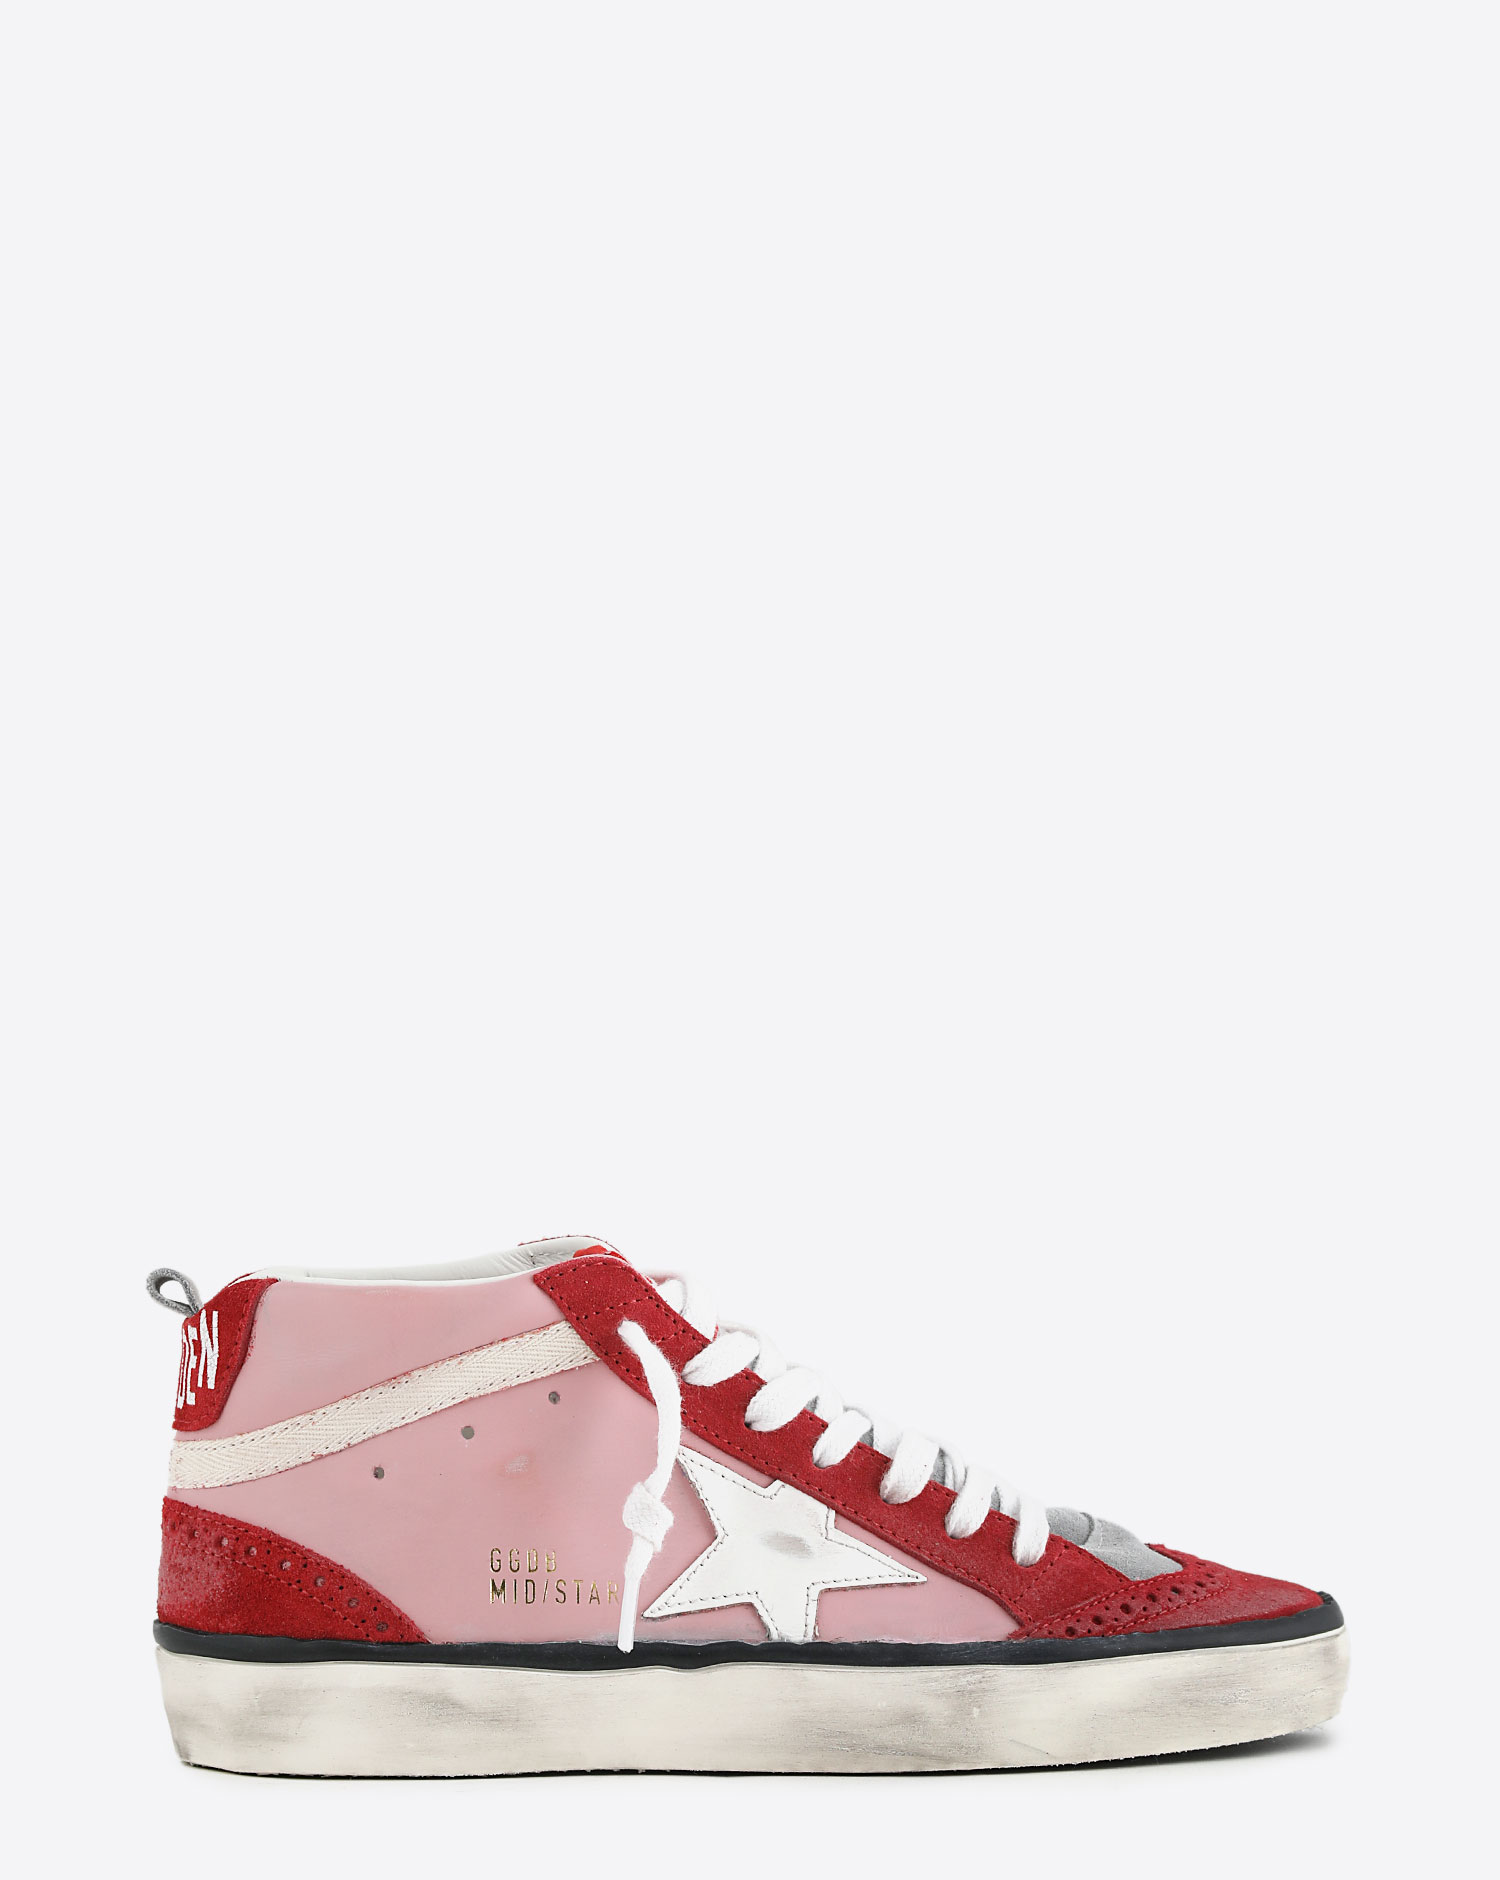 Golden Goose Sneakers Mid Star Pink Red White 82182